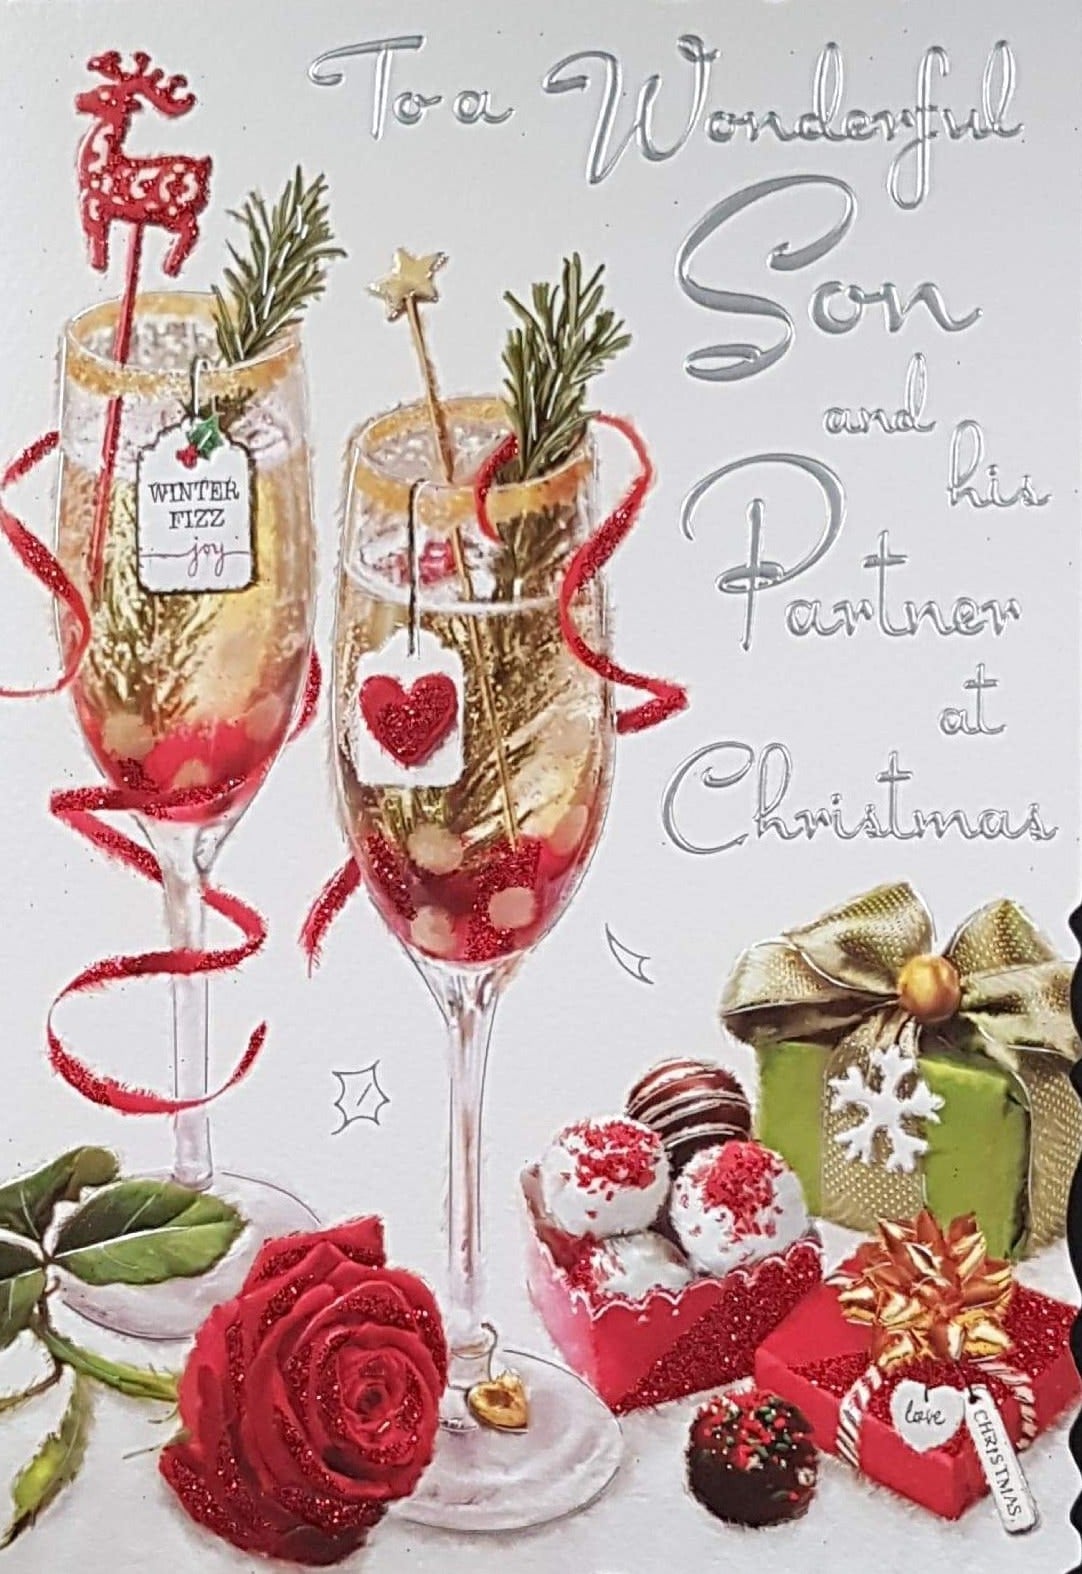 Son And His Partner Christmas Card - At Christmas & Glasses of Mulled Wine , Gifts & Rose